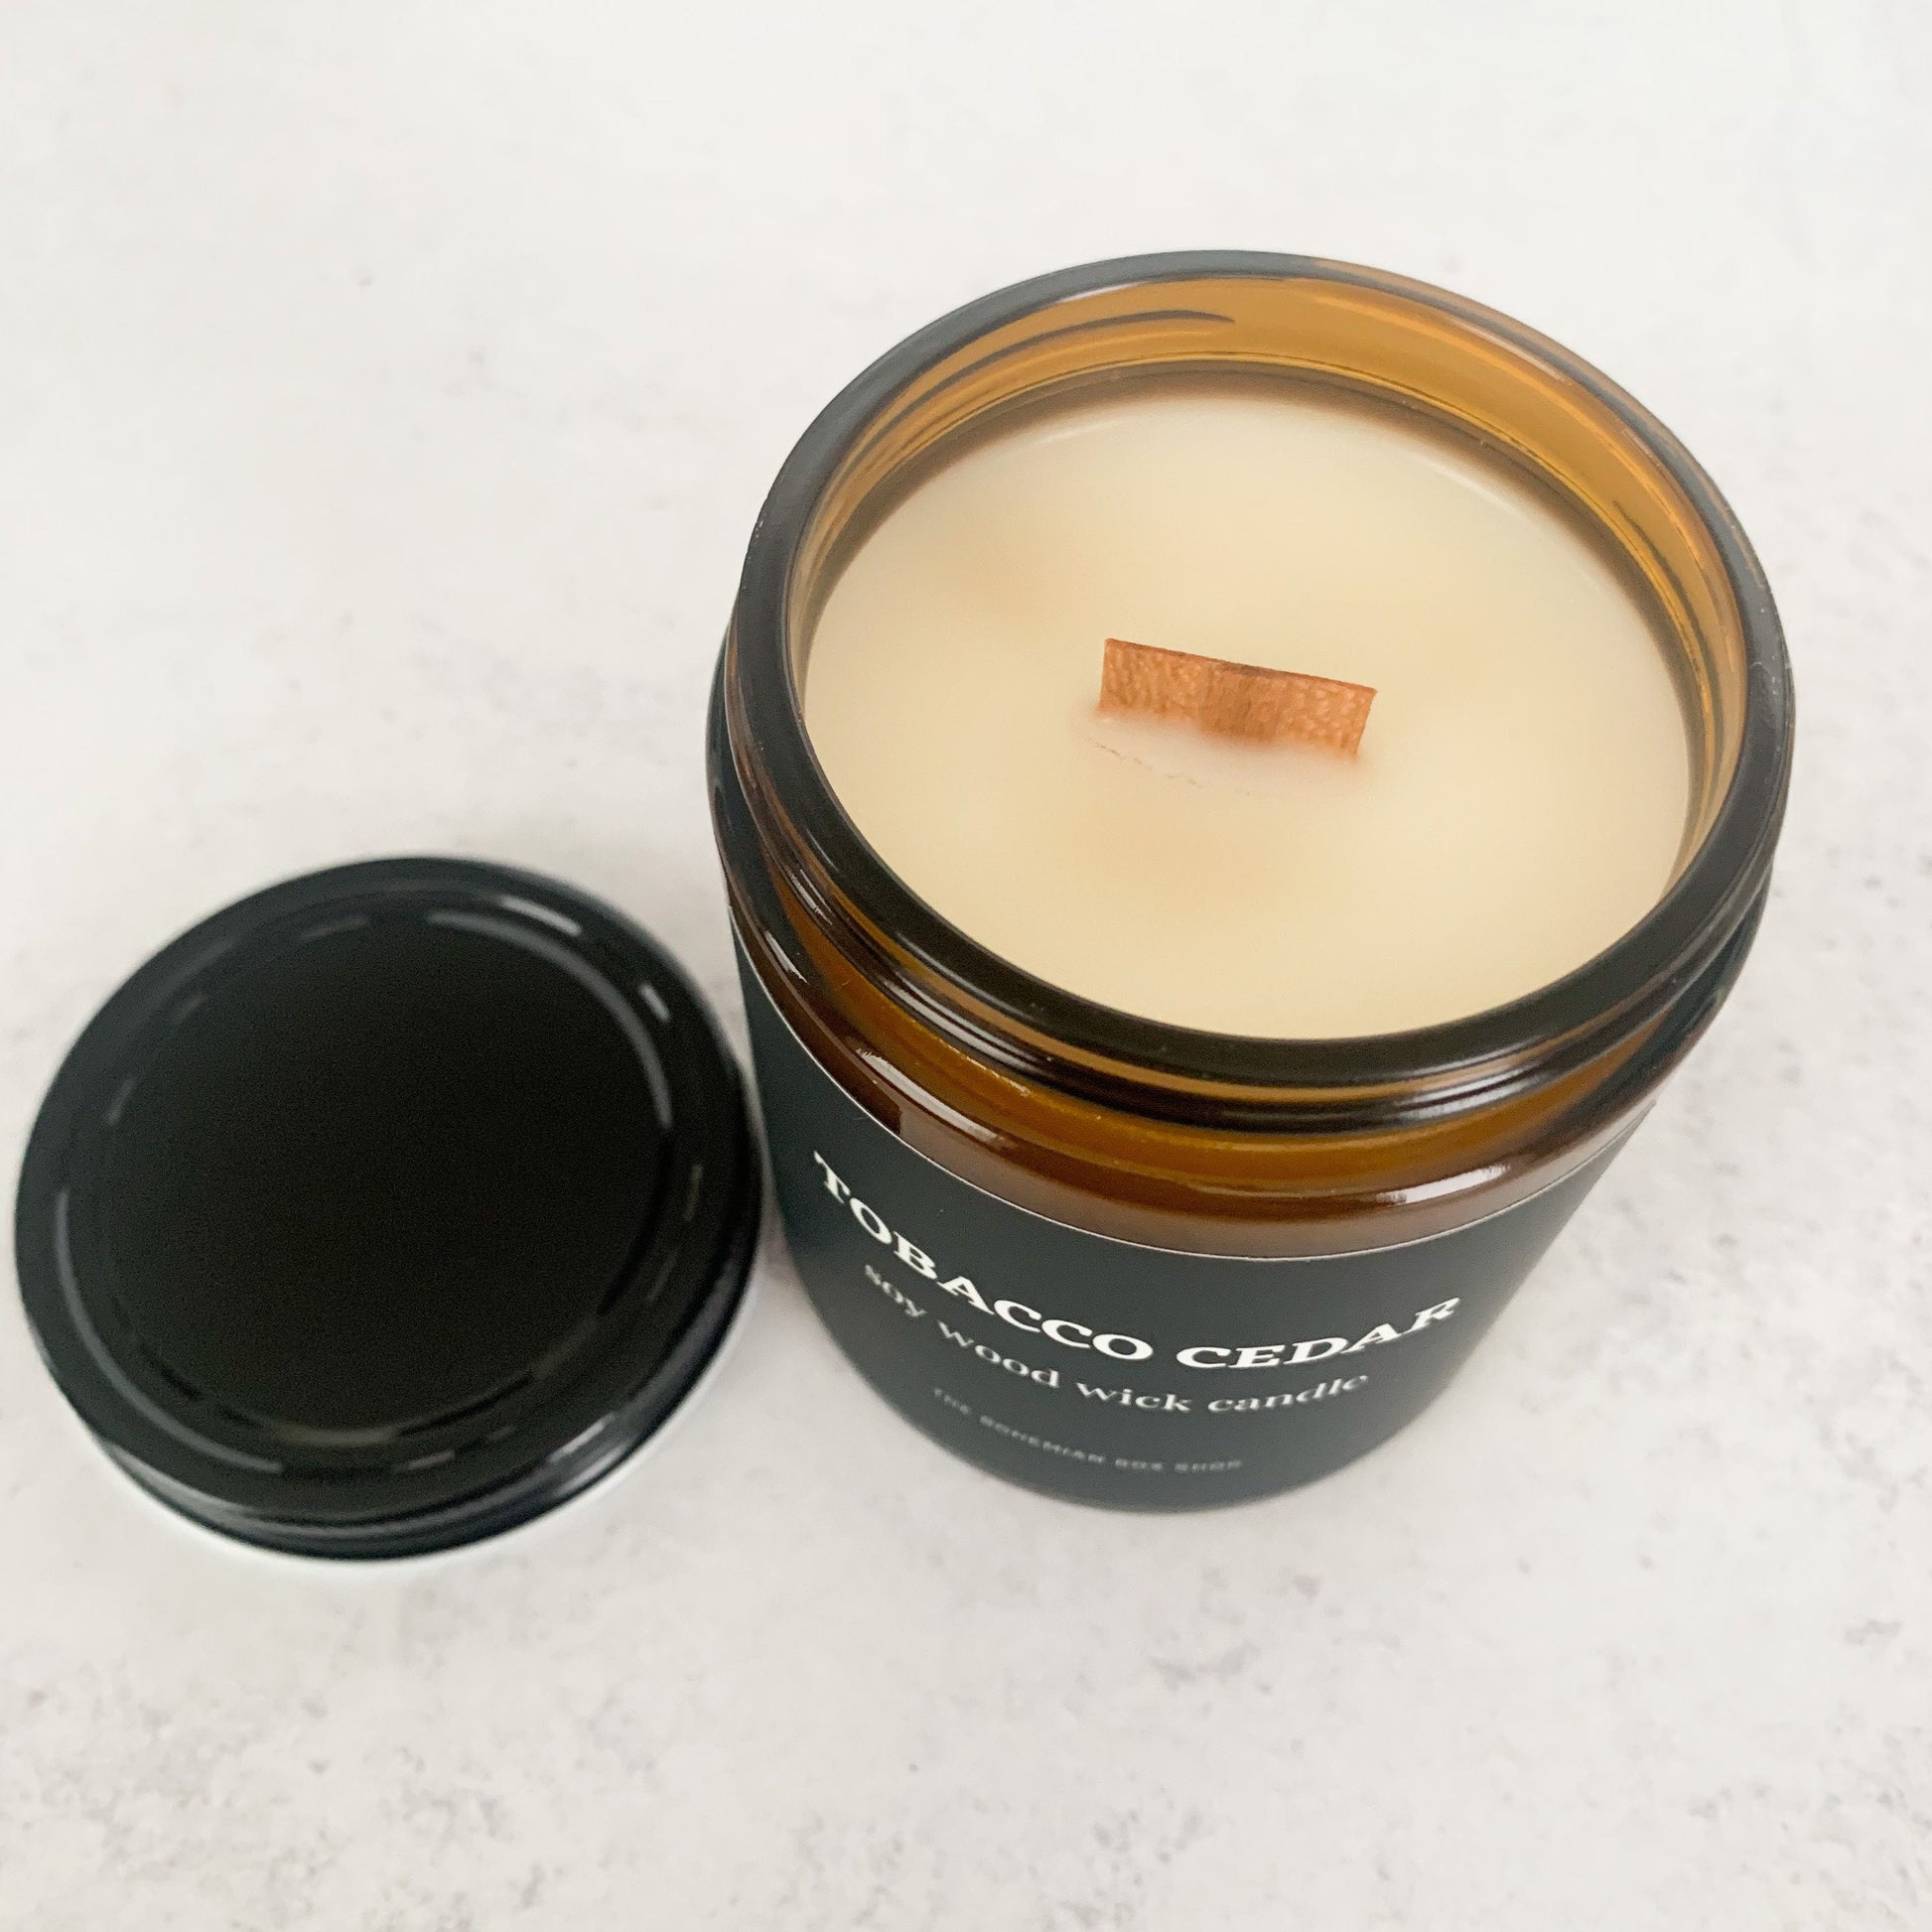 Tobacco Cedar 8oz Amber Jar Soy Candle with black lid and wood wick 